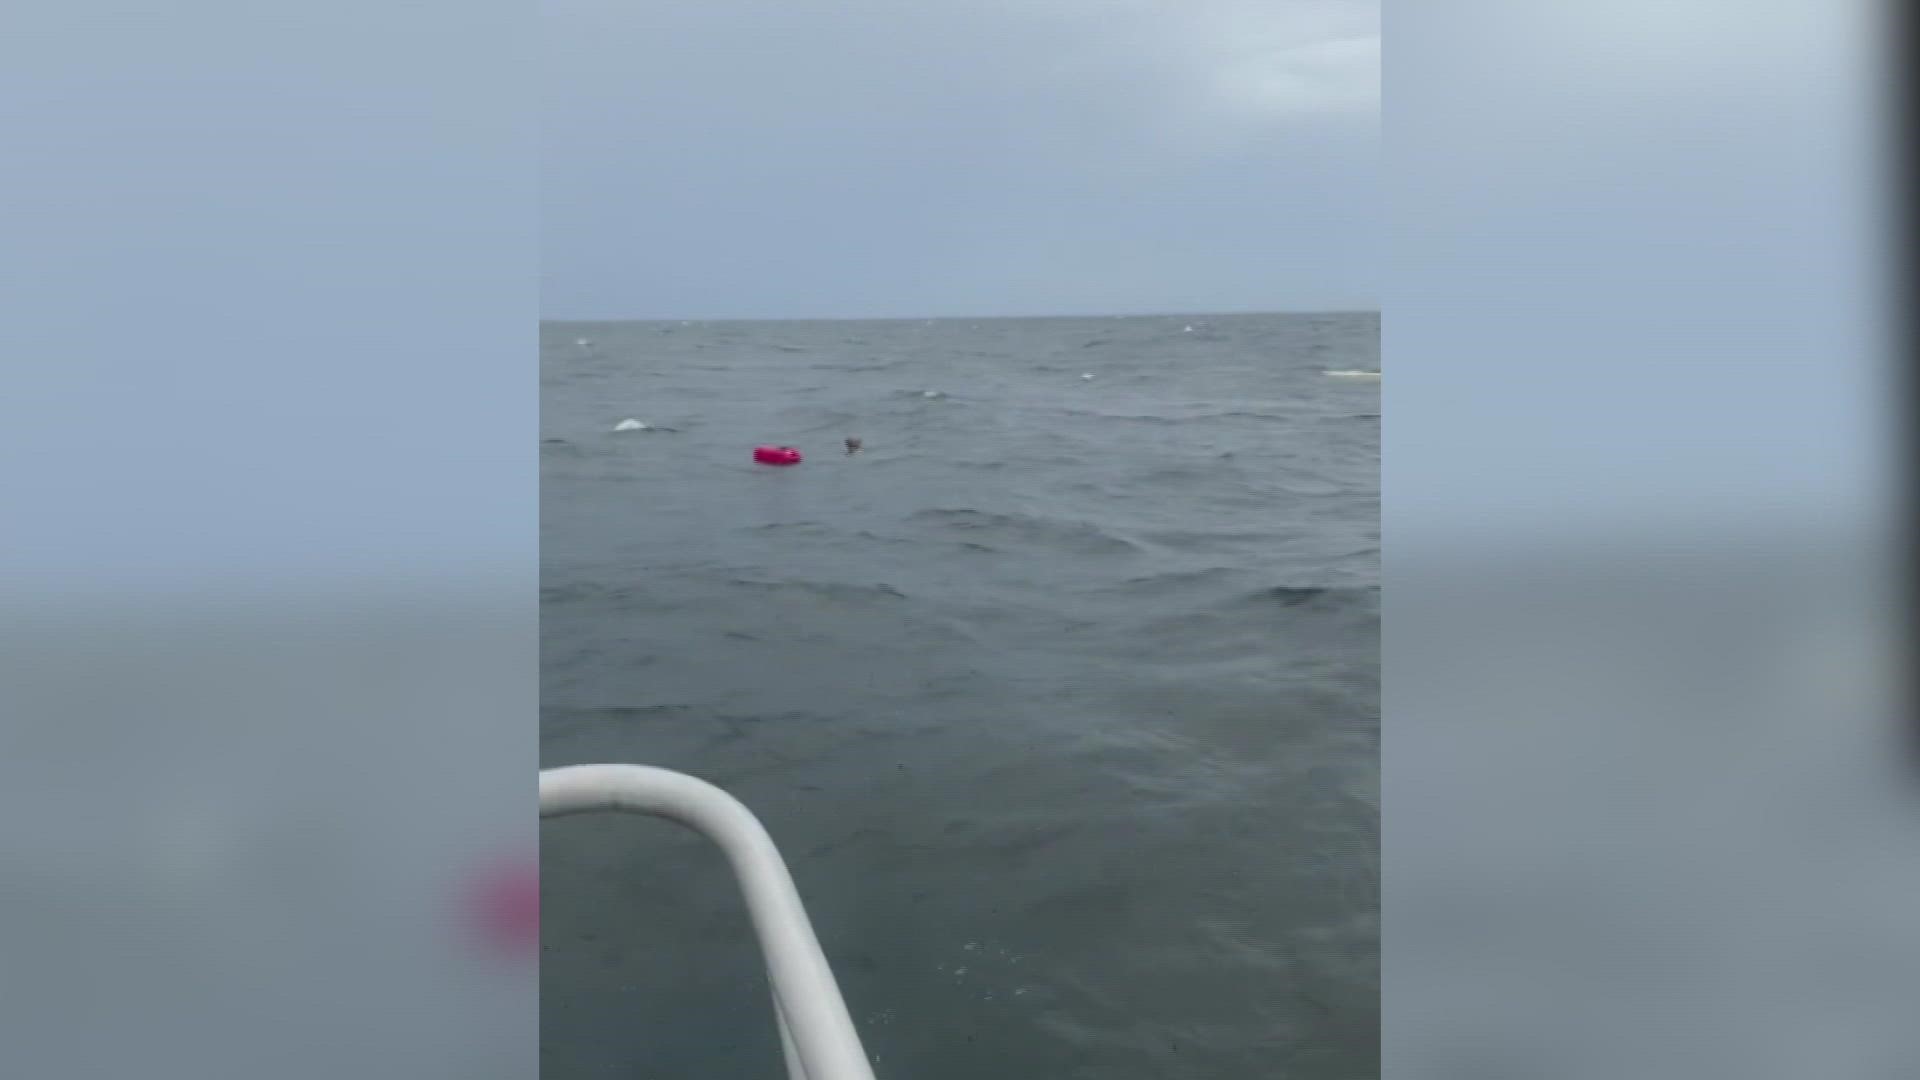 The Coast Guard rescued three people from a vessel taking on water near the St. Petersburg Pier.